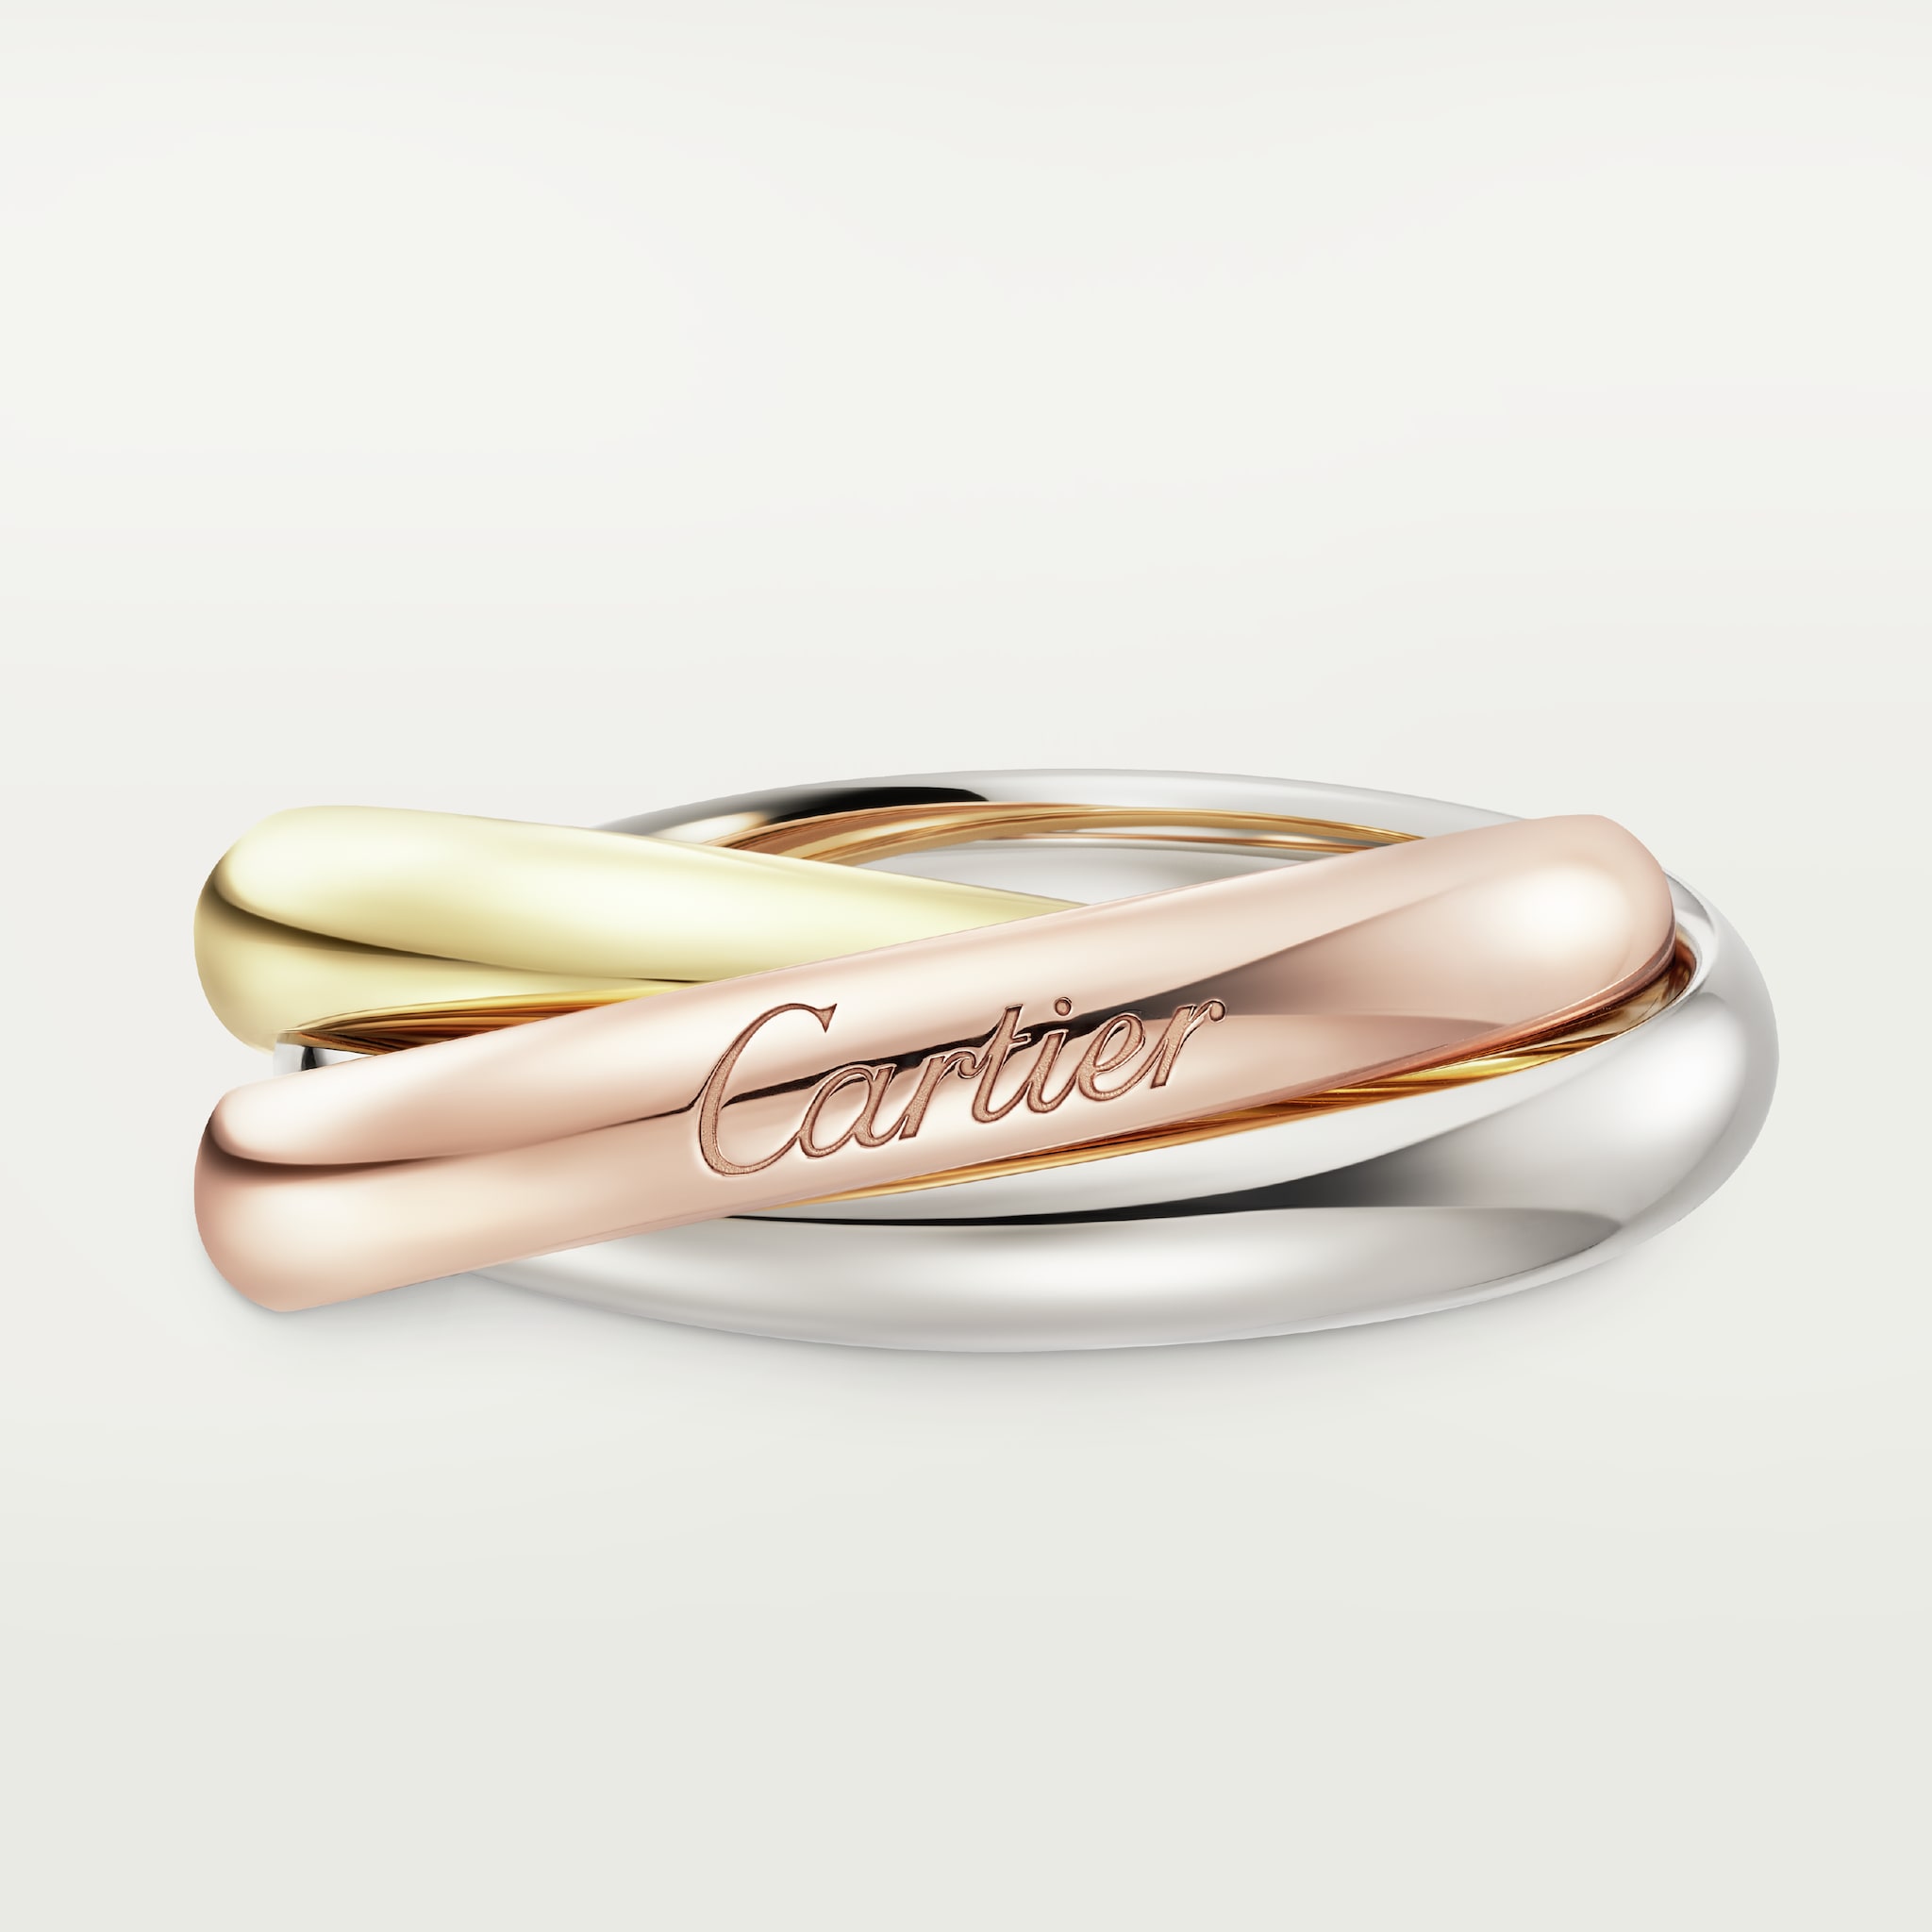 Classic Trinity ringWhite gold, rose gold, yellow gold